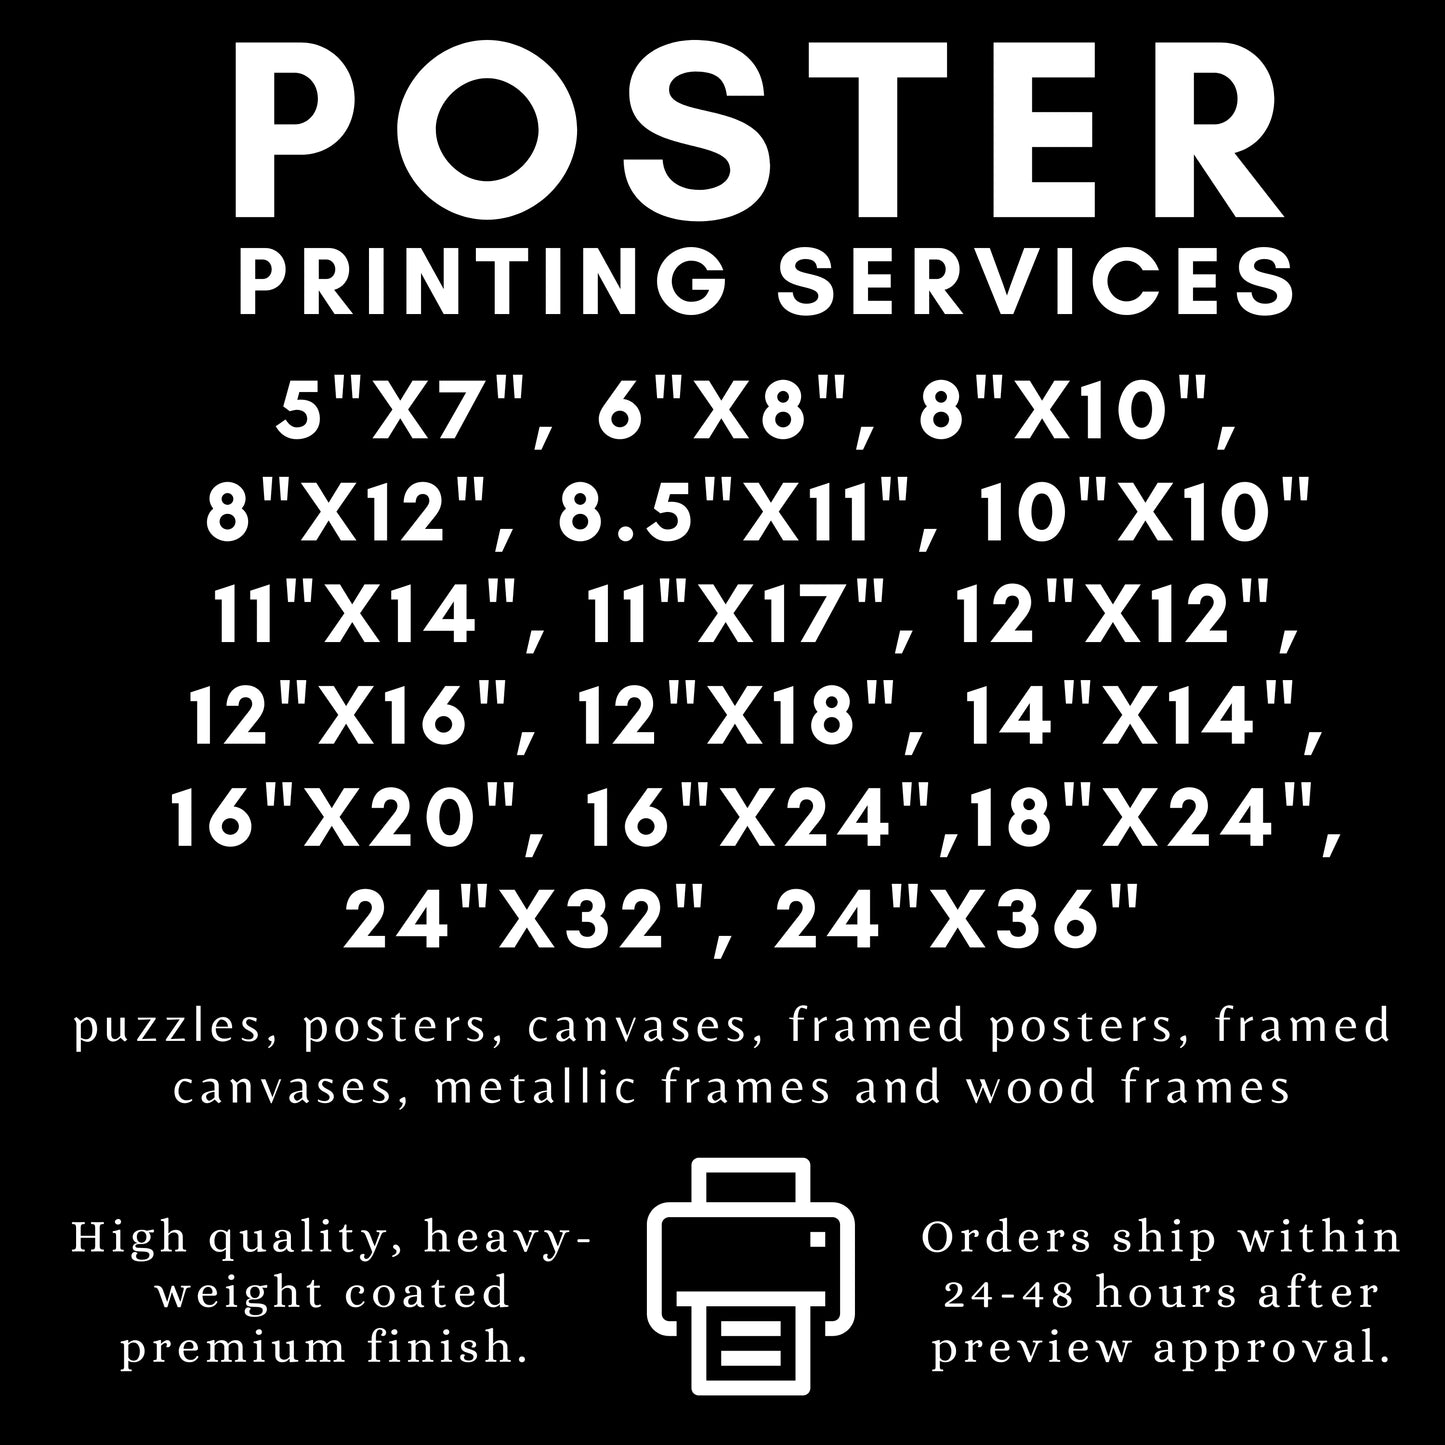 Personalized Prints And Posters For All Celebration Events | Custom Posters, Canvases, Tumblers and Framed Art | Copy Center Printing, Fulfillment, and Dropship Services Available